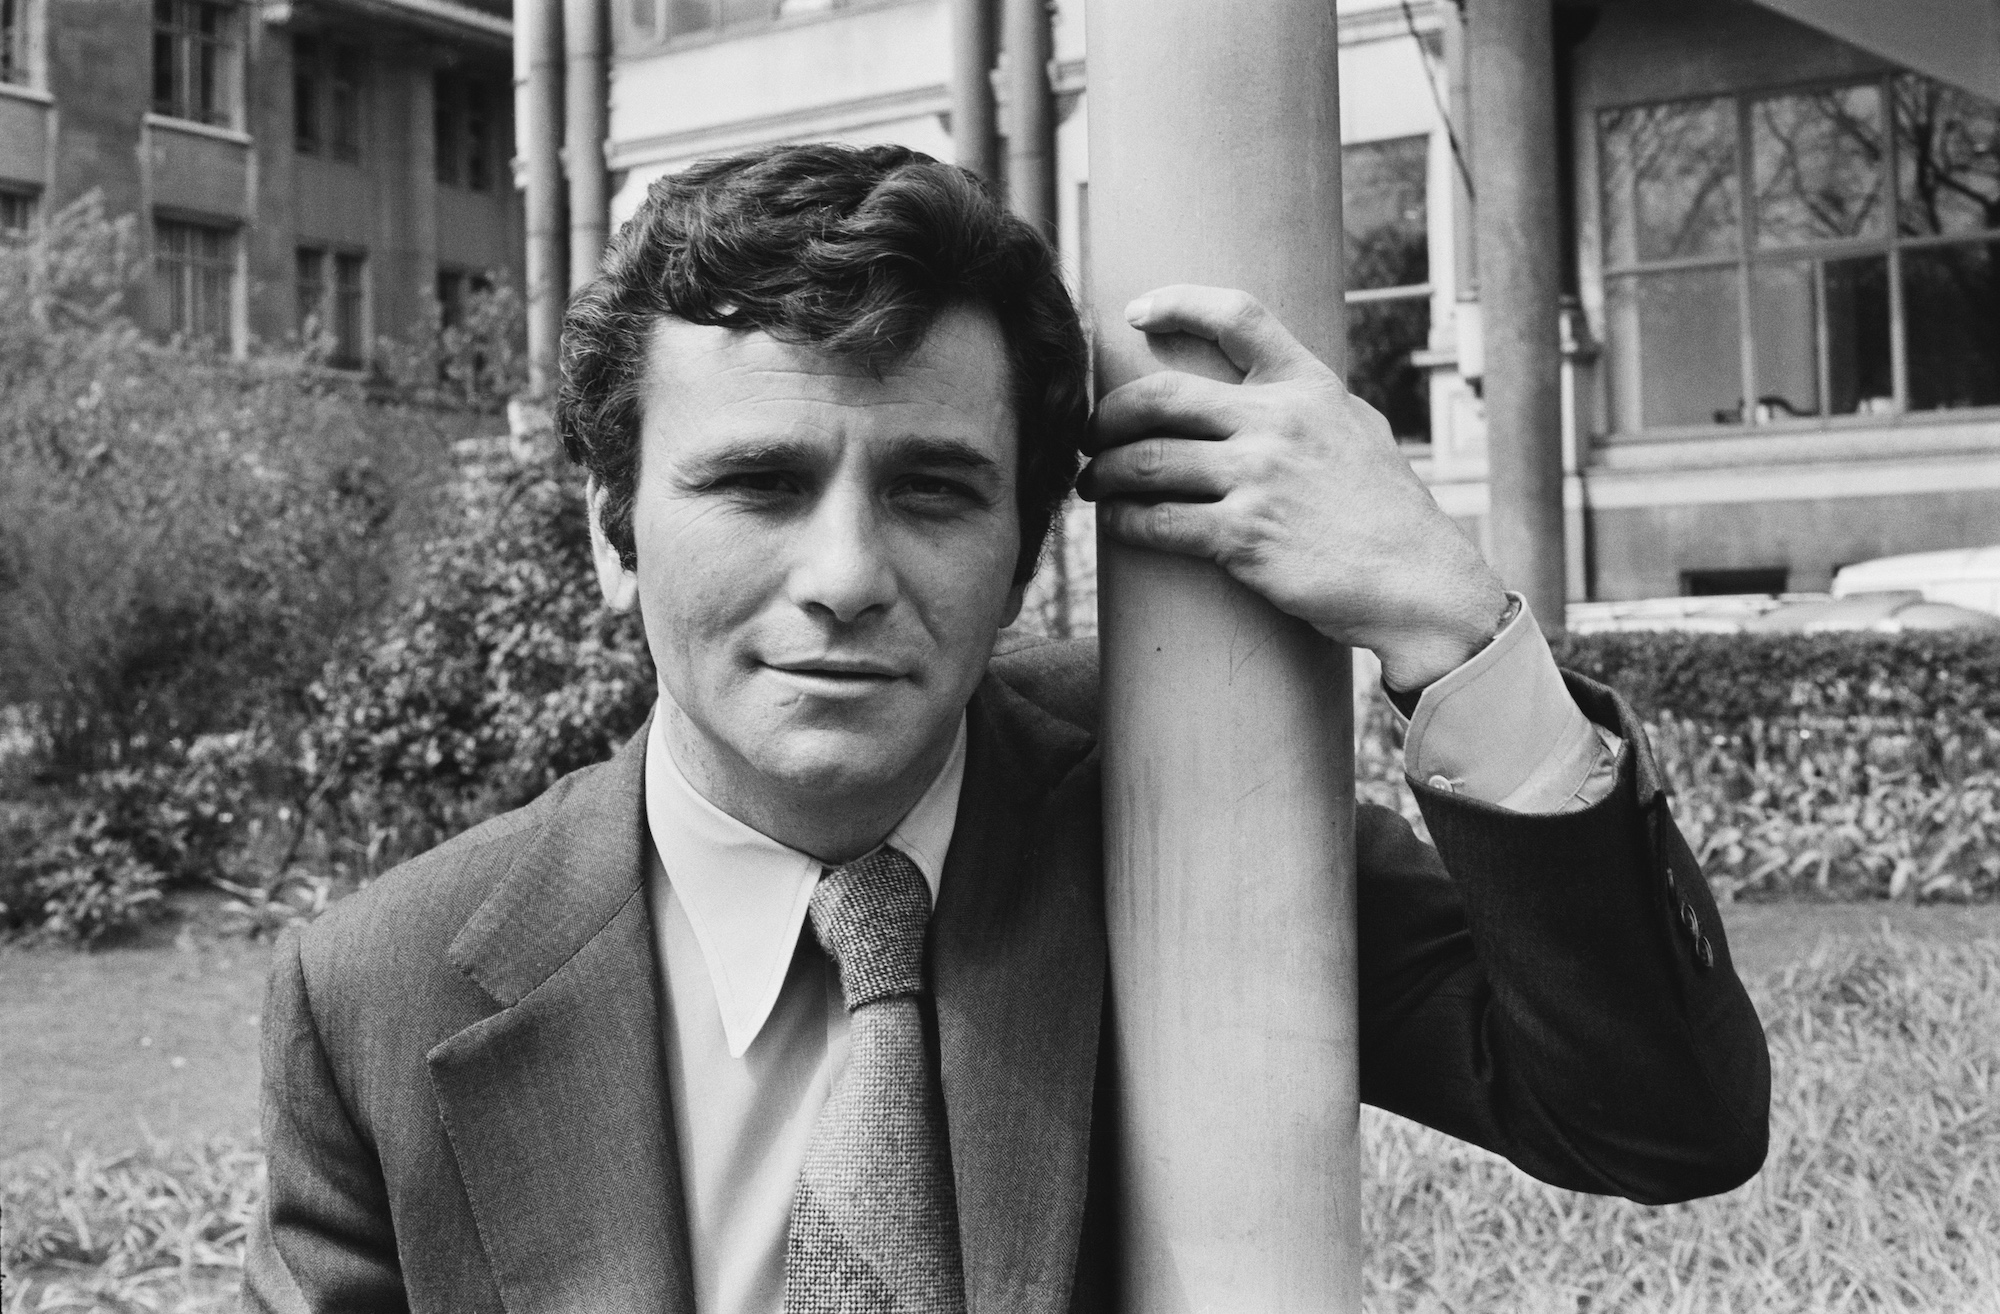 Columbo': Peter Falk Was Told He Would Never Make It In Film Due to His  Appearance